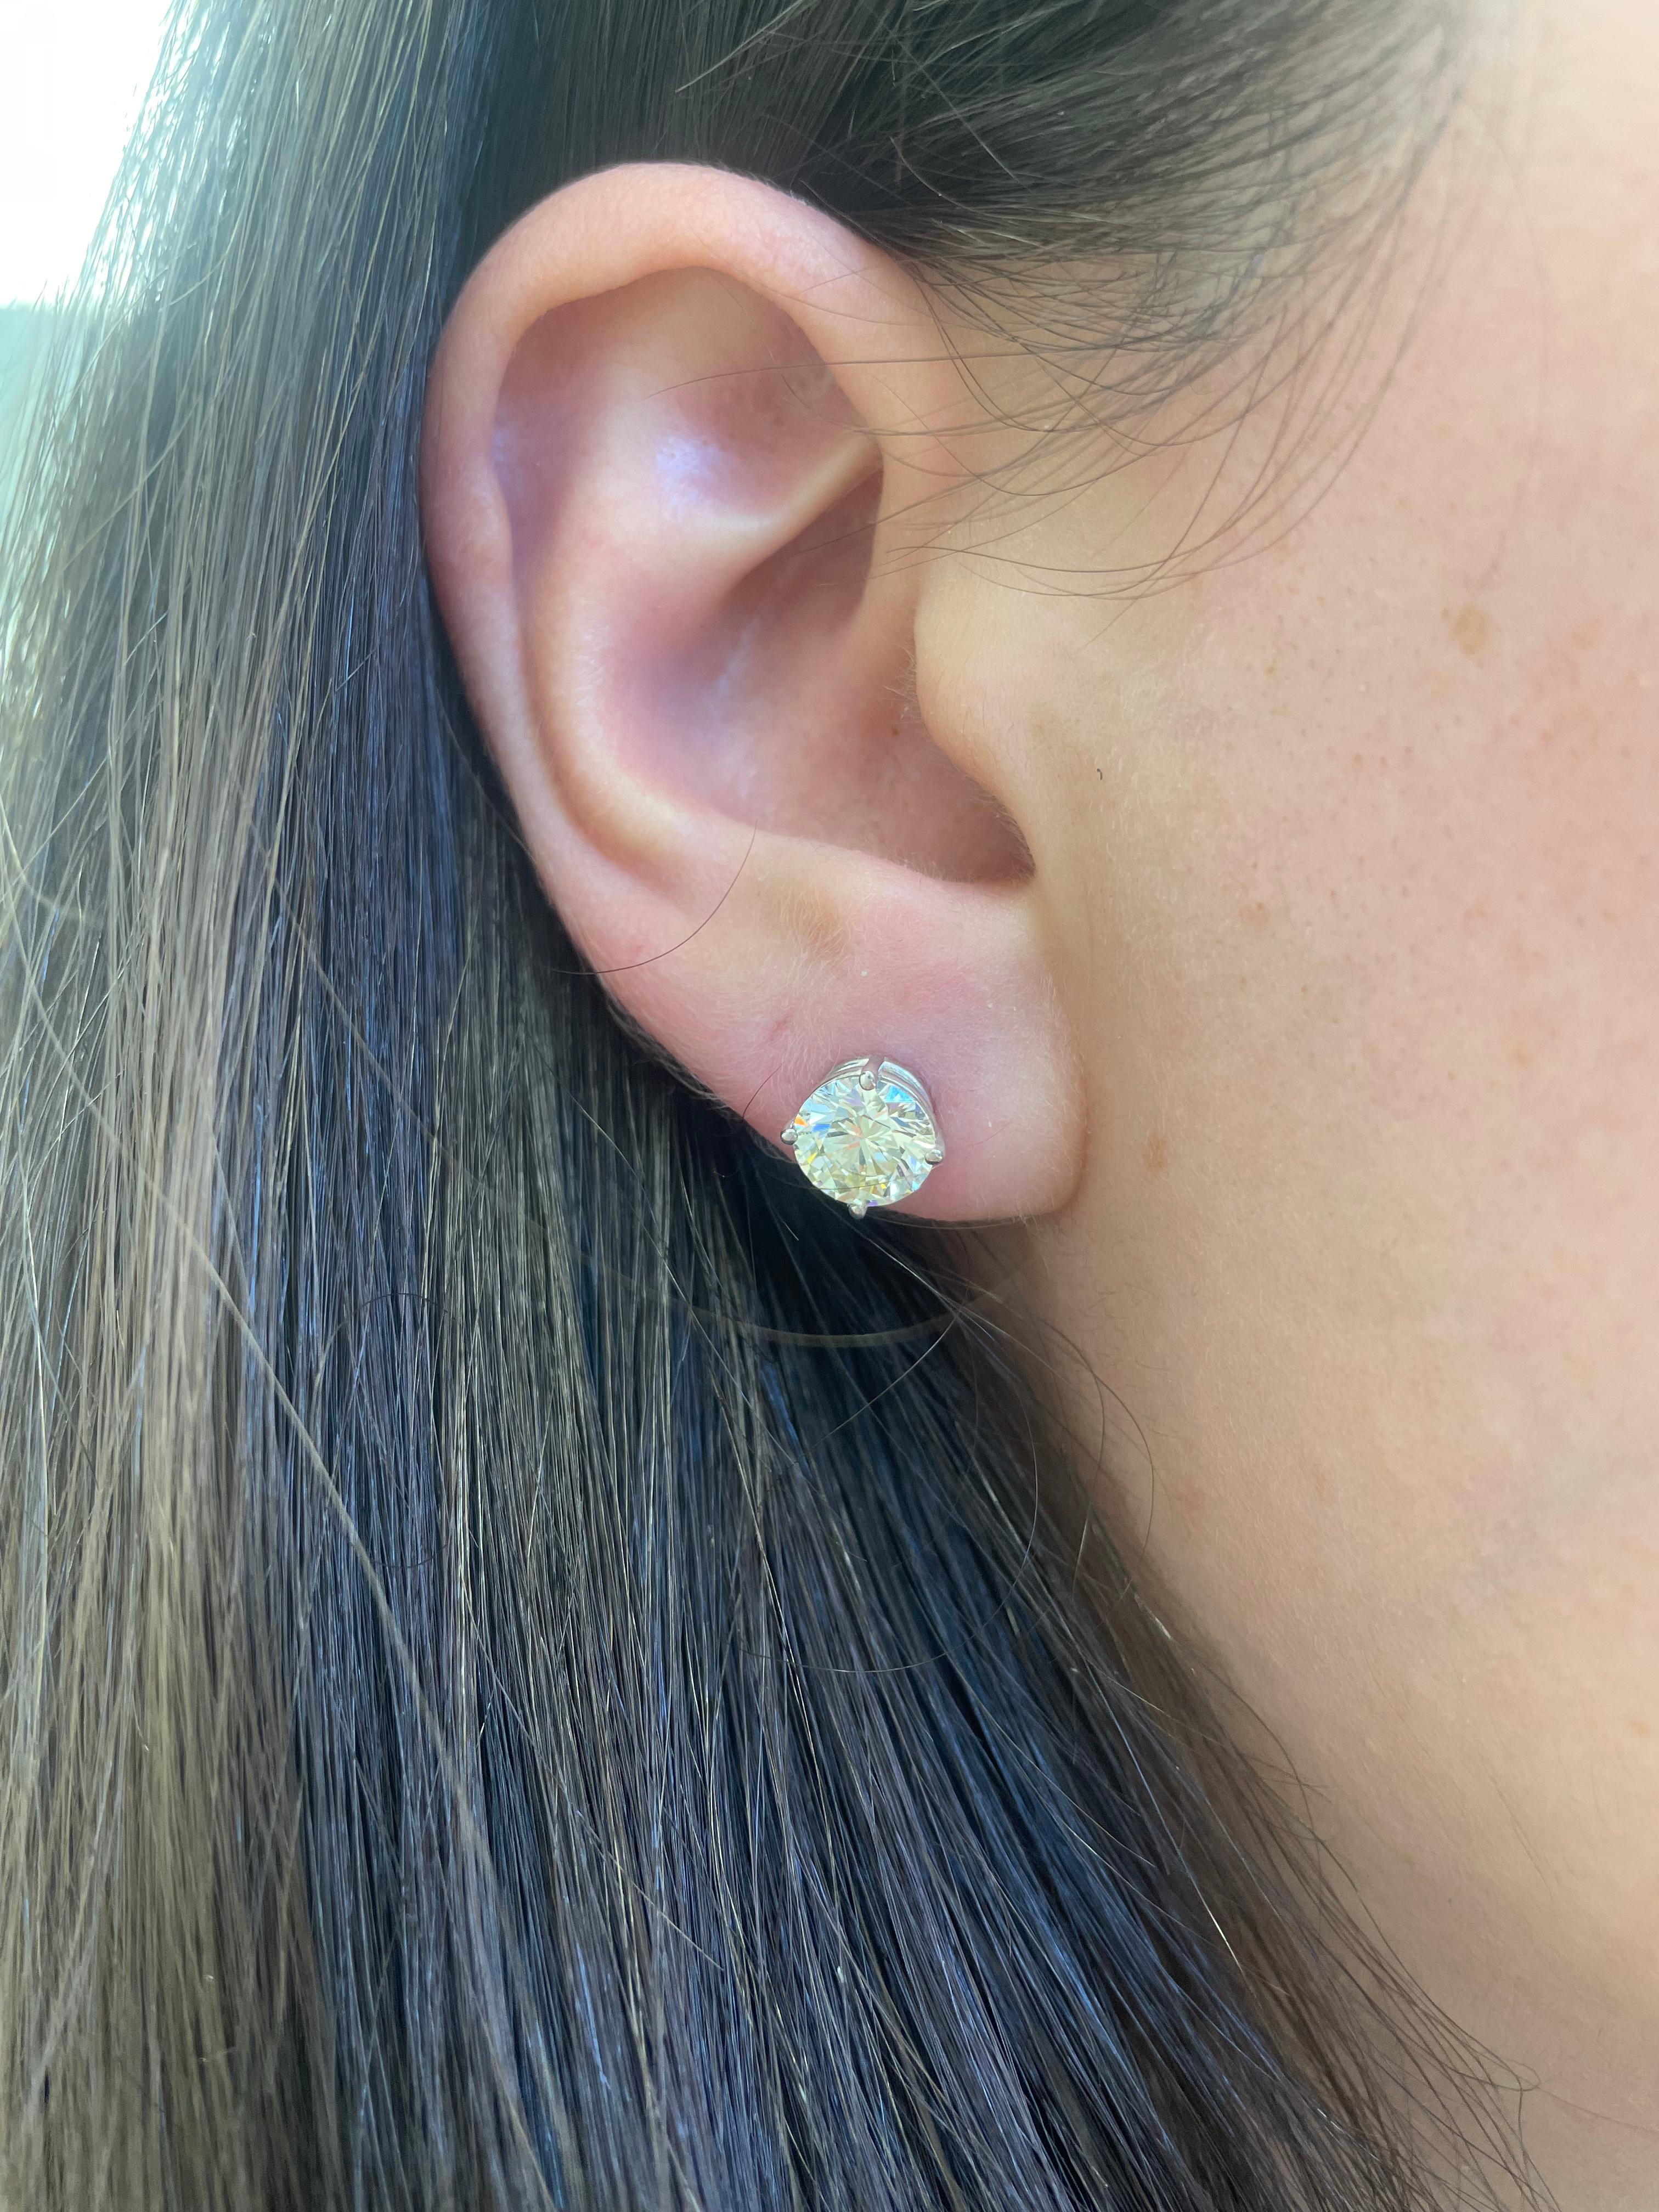 Classic diamond stud earrings, each stone EGL certified, by Alexander Beverly Hills.
Two matching round brilliant diamonds 2.51 carats total. Both stones L color grade, one stone VS1 clarity grade and the other VS2 clarity grade. 18k white